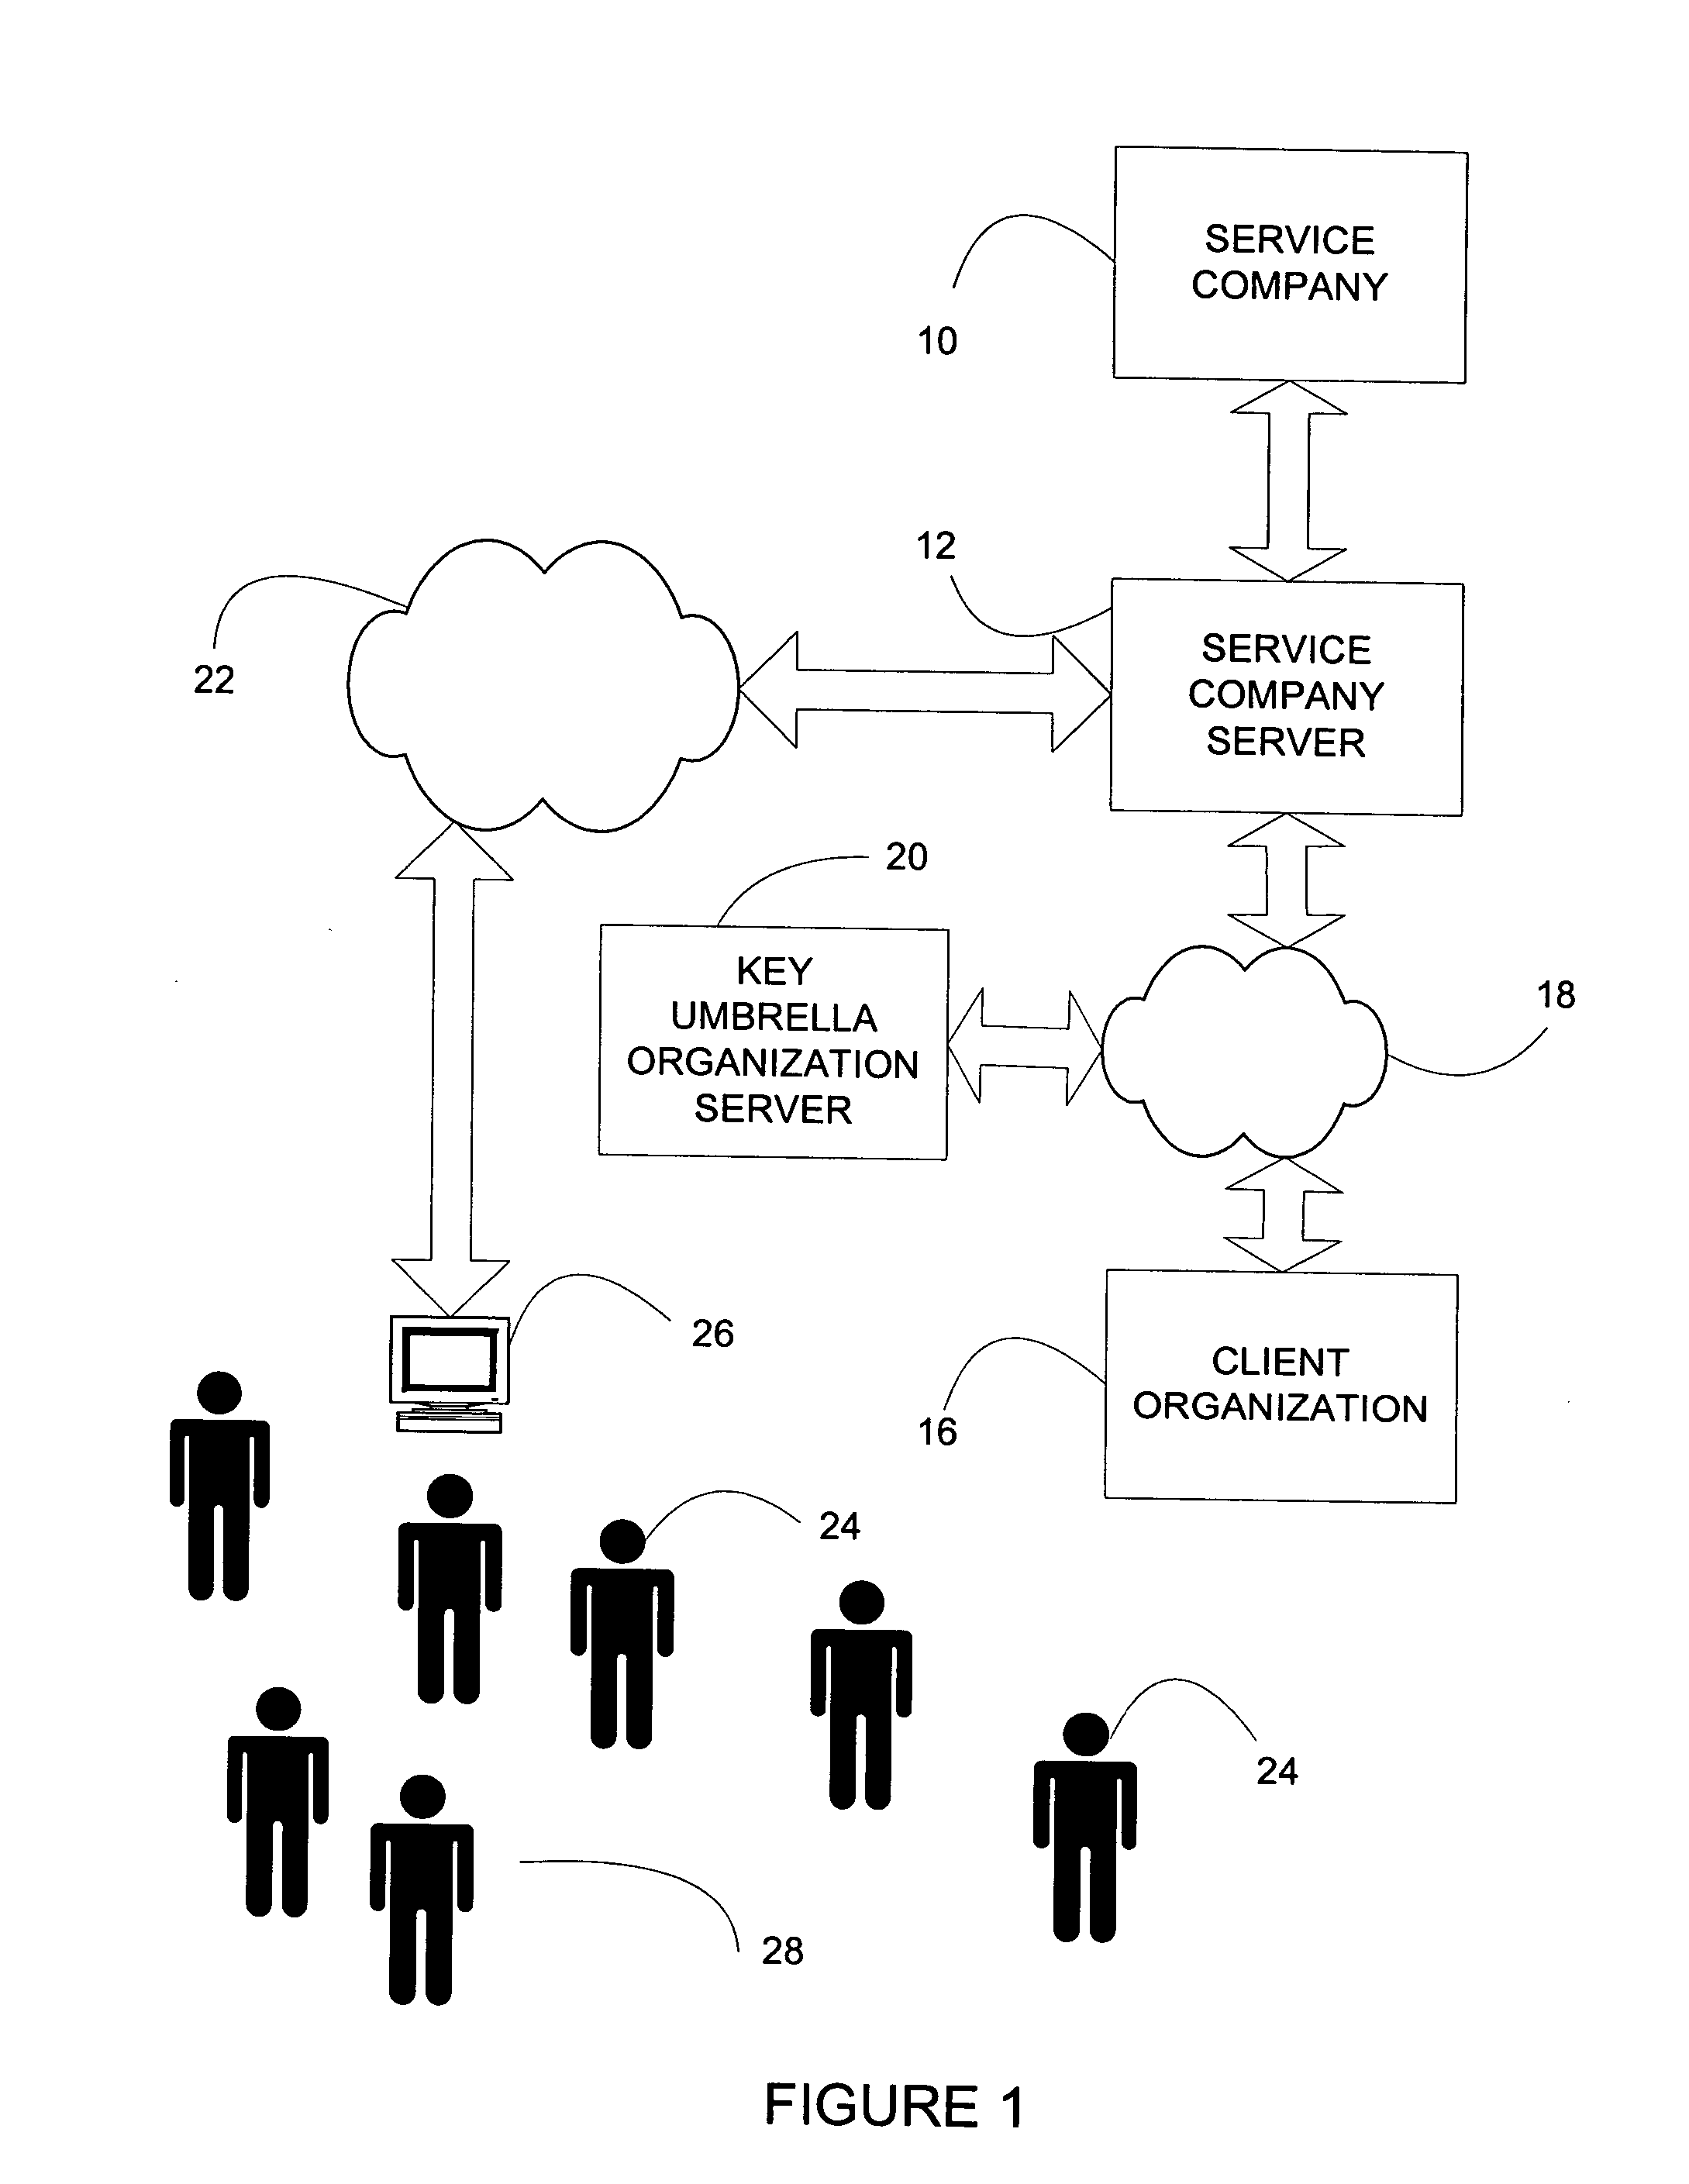 Method for distributing software and services